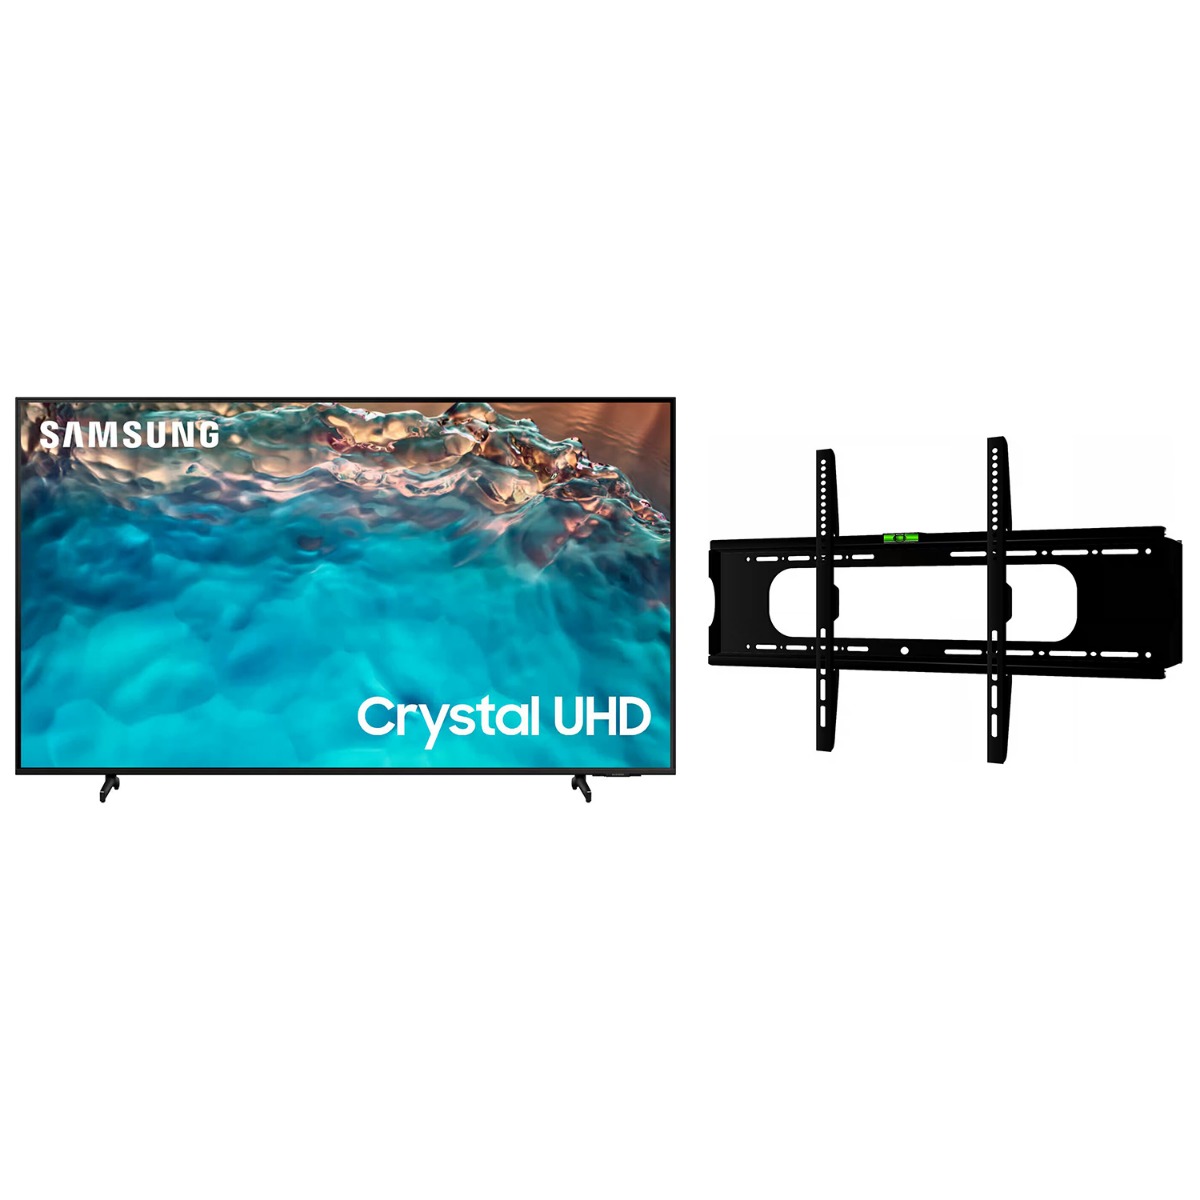 Samsung Series 8, 65 Inch, 4K UHD LED Smart TV with Built-in Receiver - 65CU8000 with Falcon Wall mount for 40-70 Inch TV, Black - FP-70